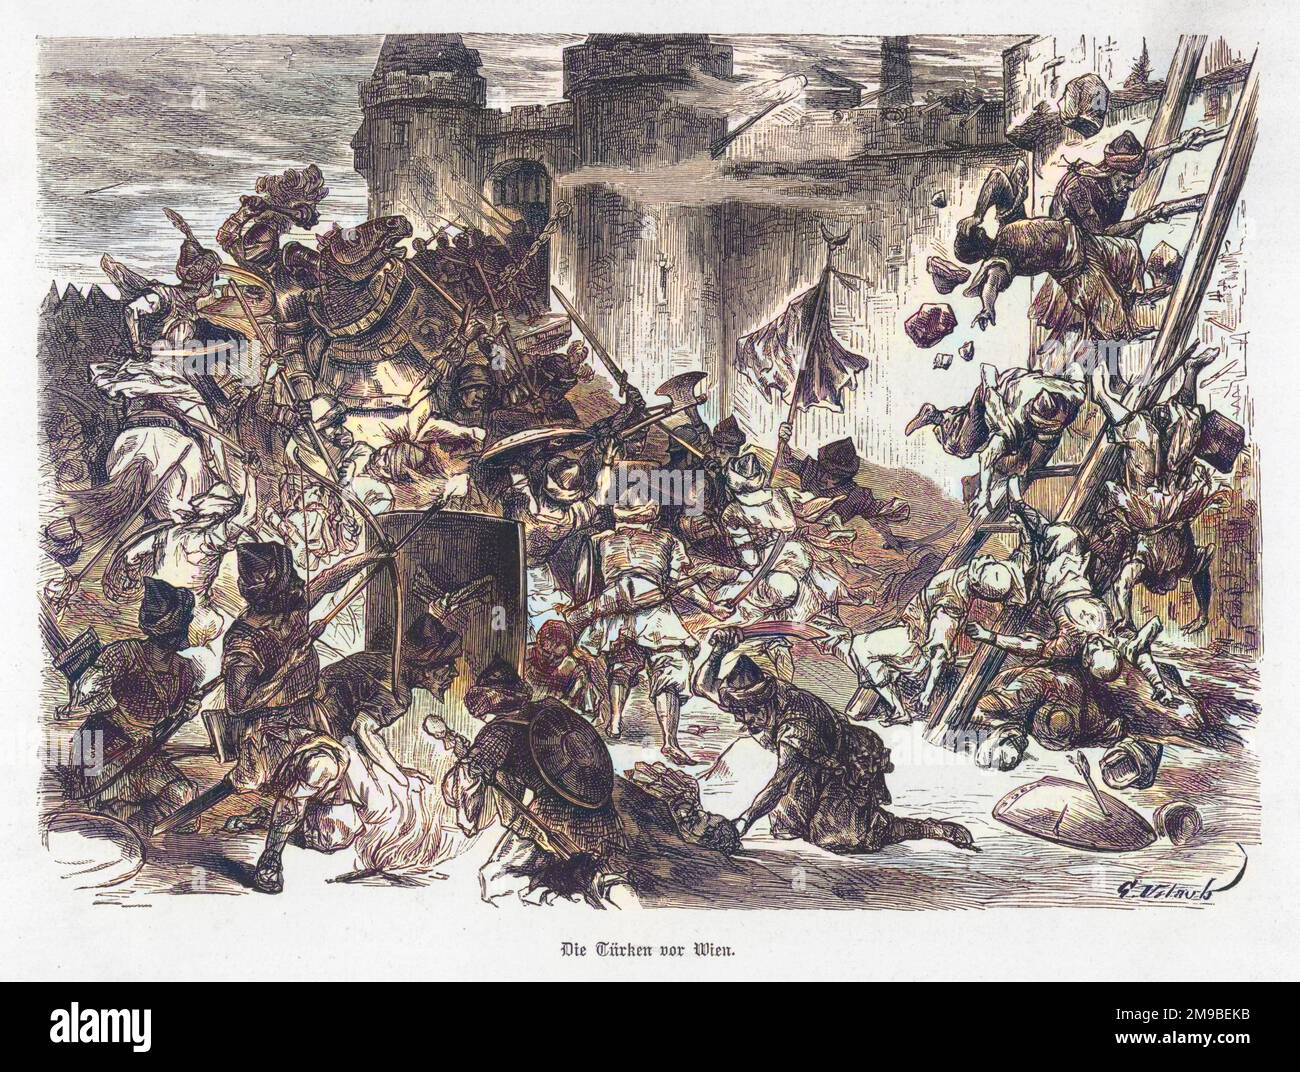 John III Sobieski, king of Poland, attacks the Turkish army under Kara Mustapha Pashs besieging Vienna, and though outnumbered 2 to 1 routs it and saves the city Stock Photo